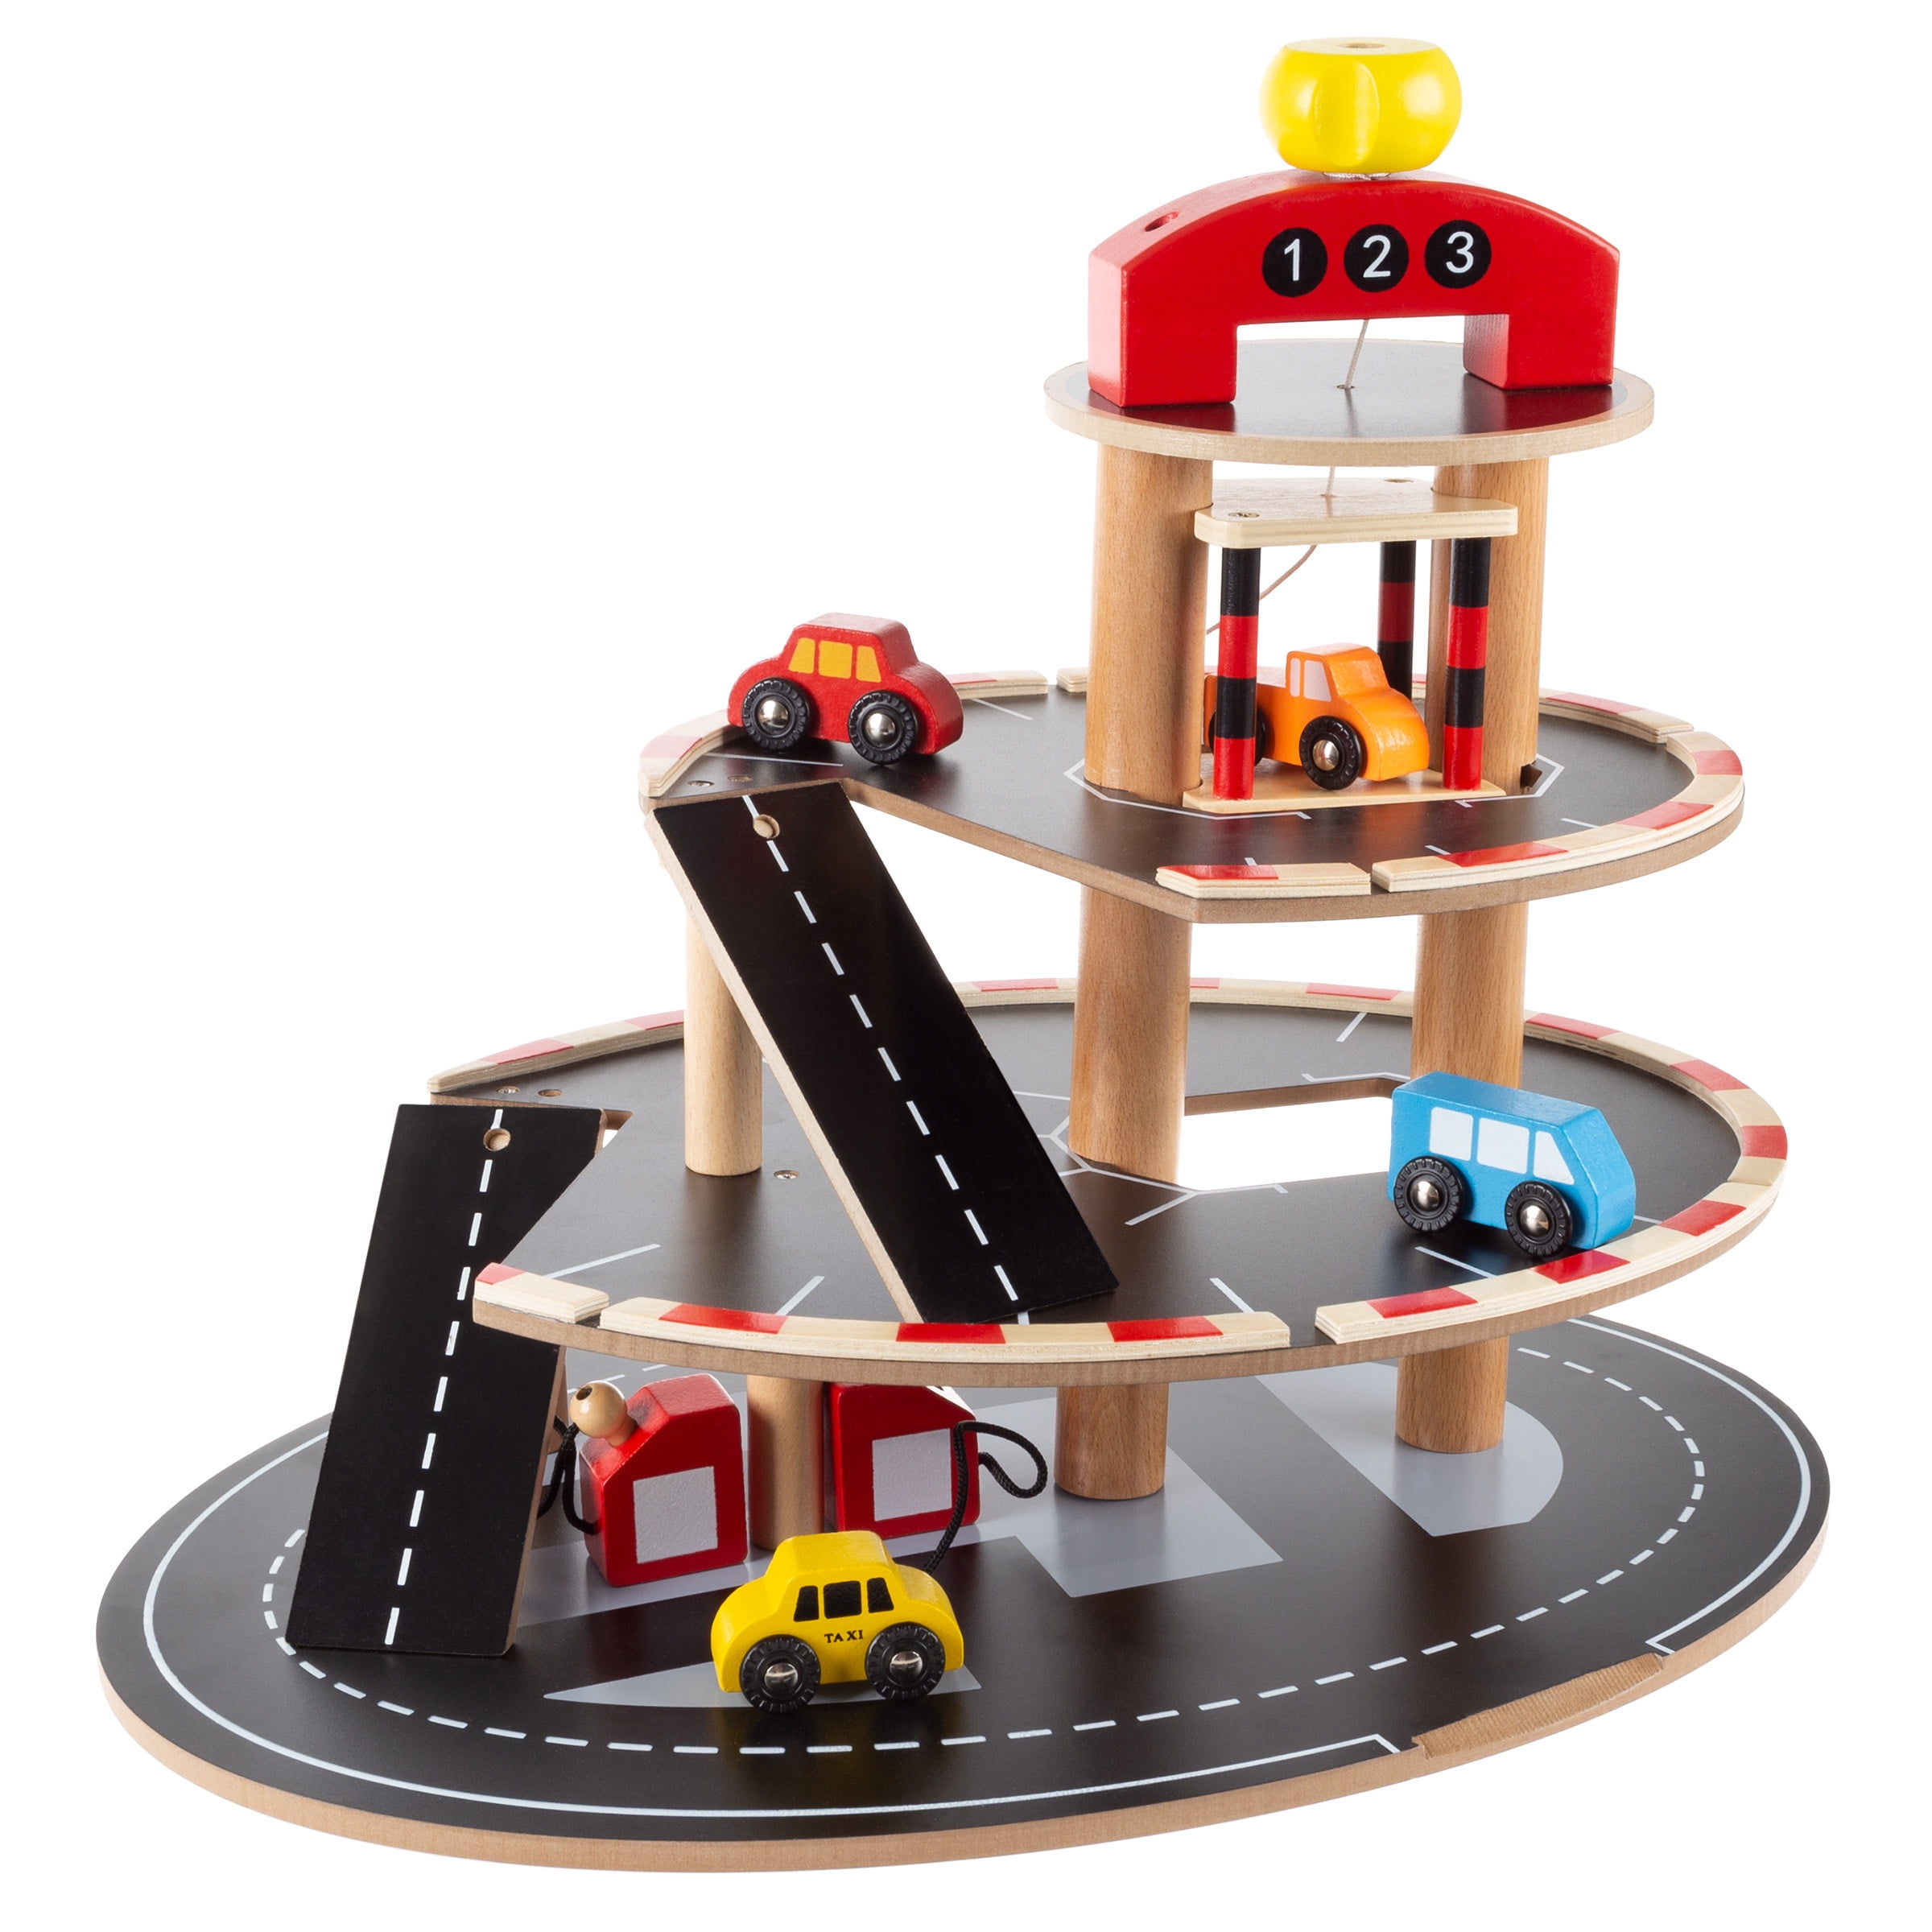 Gas Station Ticket Booth ToyKraft Wooden Garage 3 Level Story Car Service Station Deluxe City Play Toy Set Car Wash Vehicles Ramps Helicopter Pad Parking Garage 